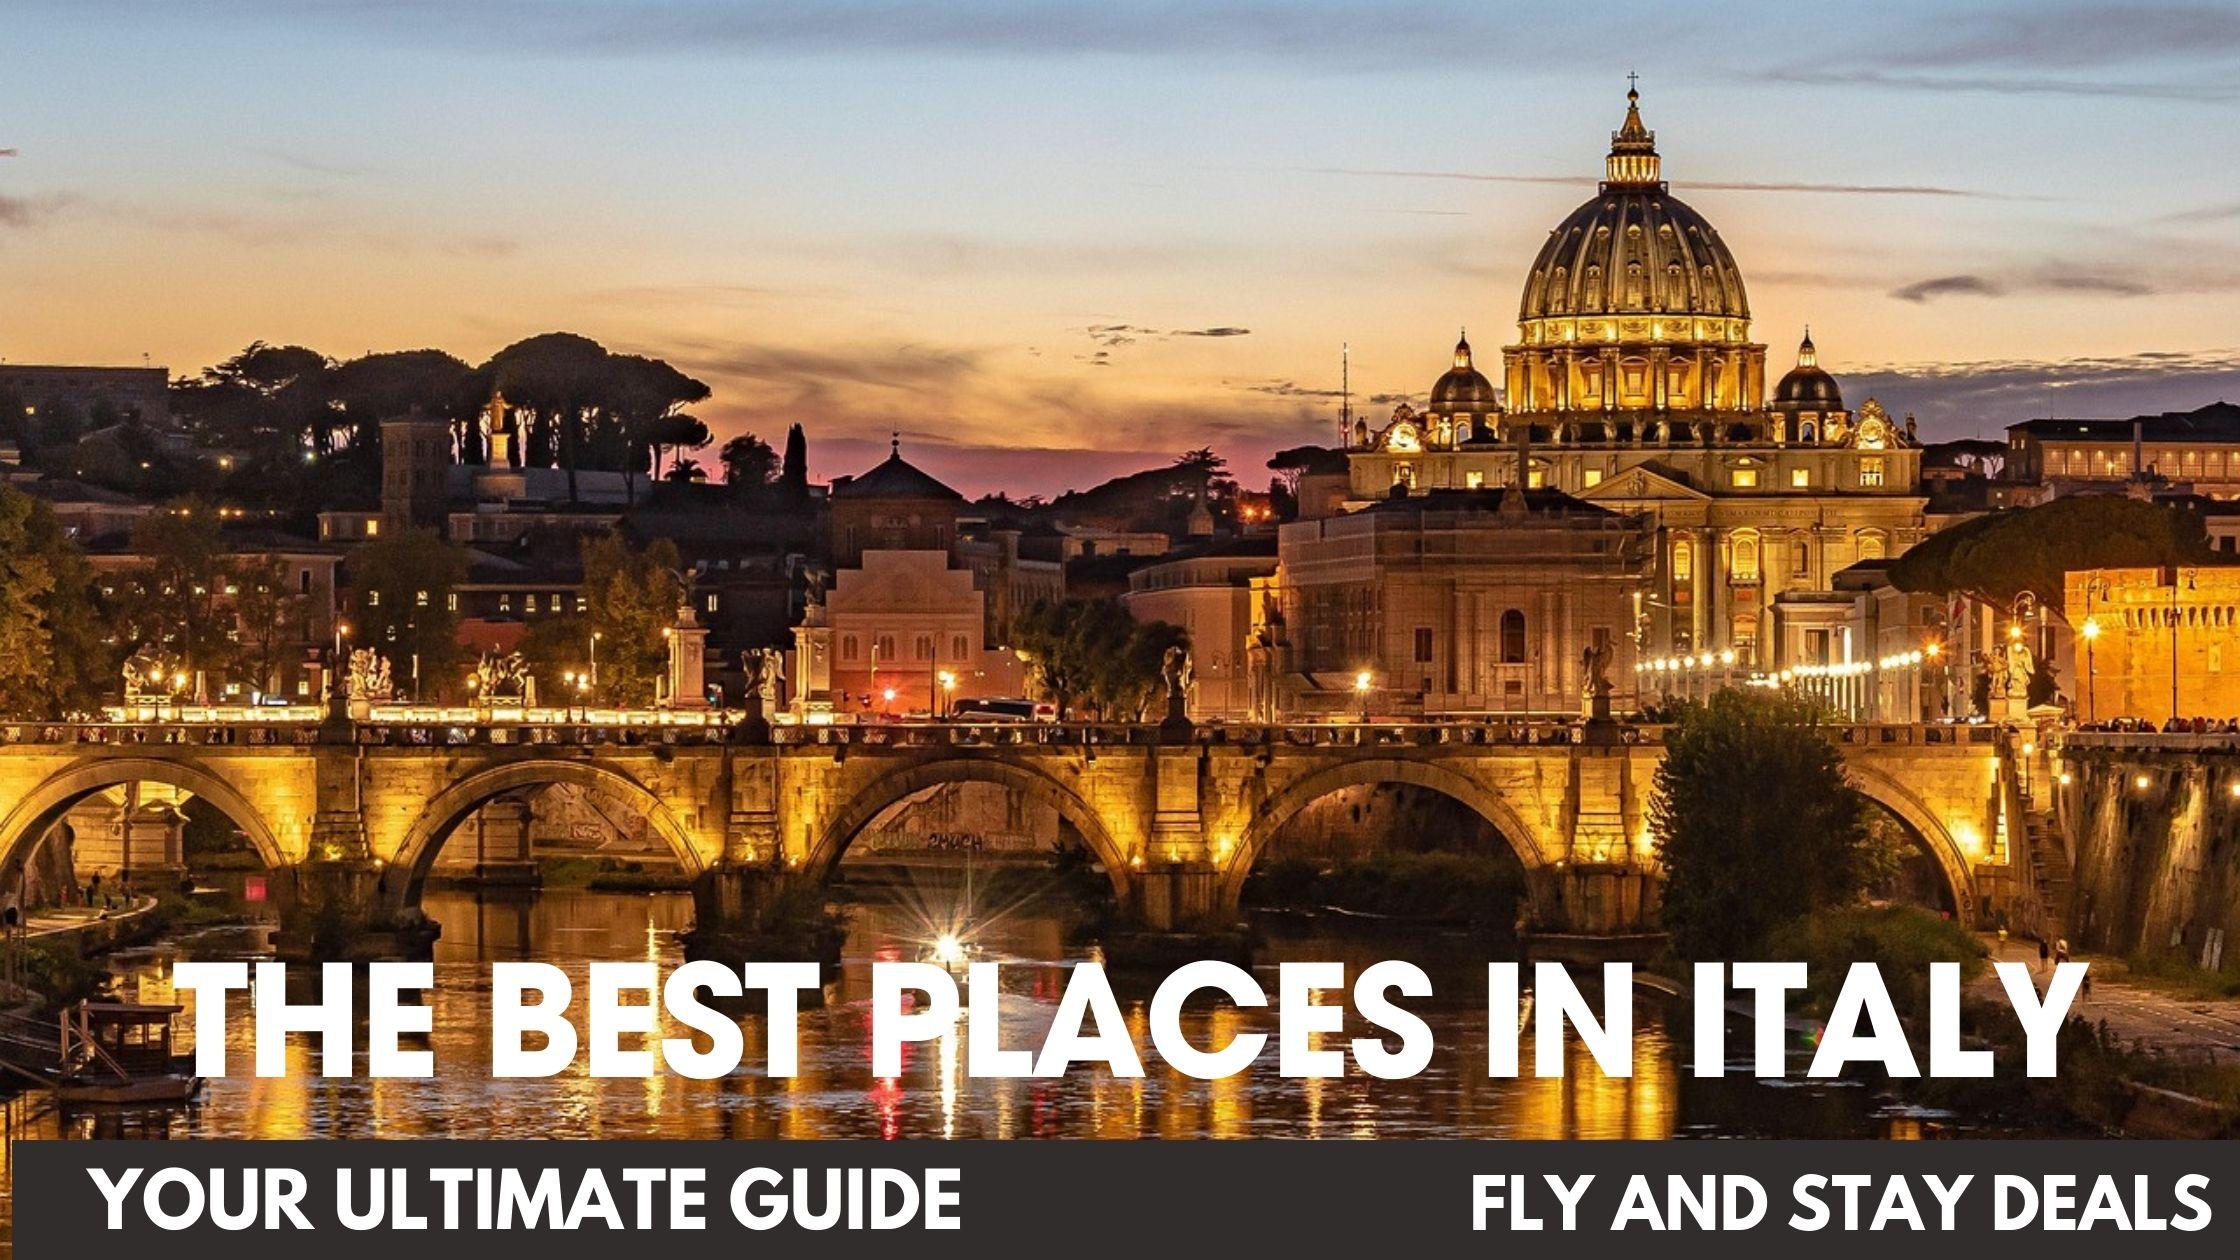 The Best Places to see in Italy – Your Ultimate Guide